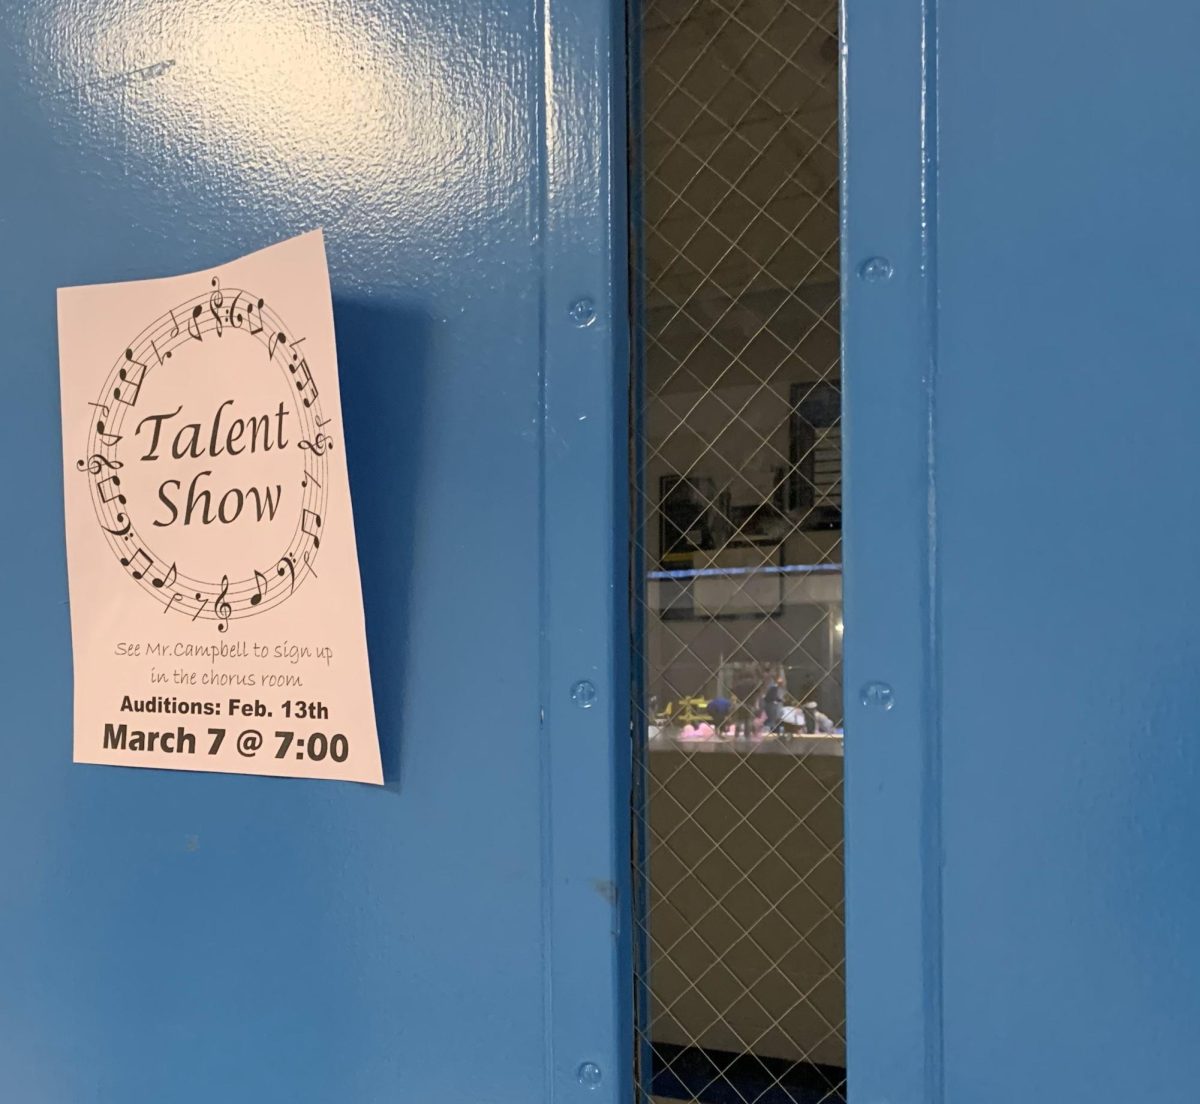 Talent show auditions have recently past and now Warriors can prepare for the real deal.